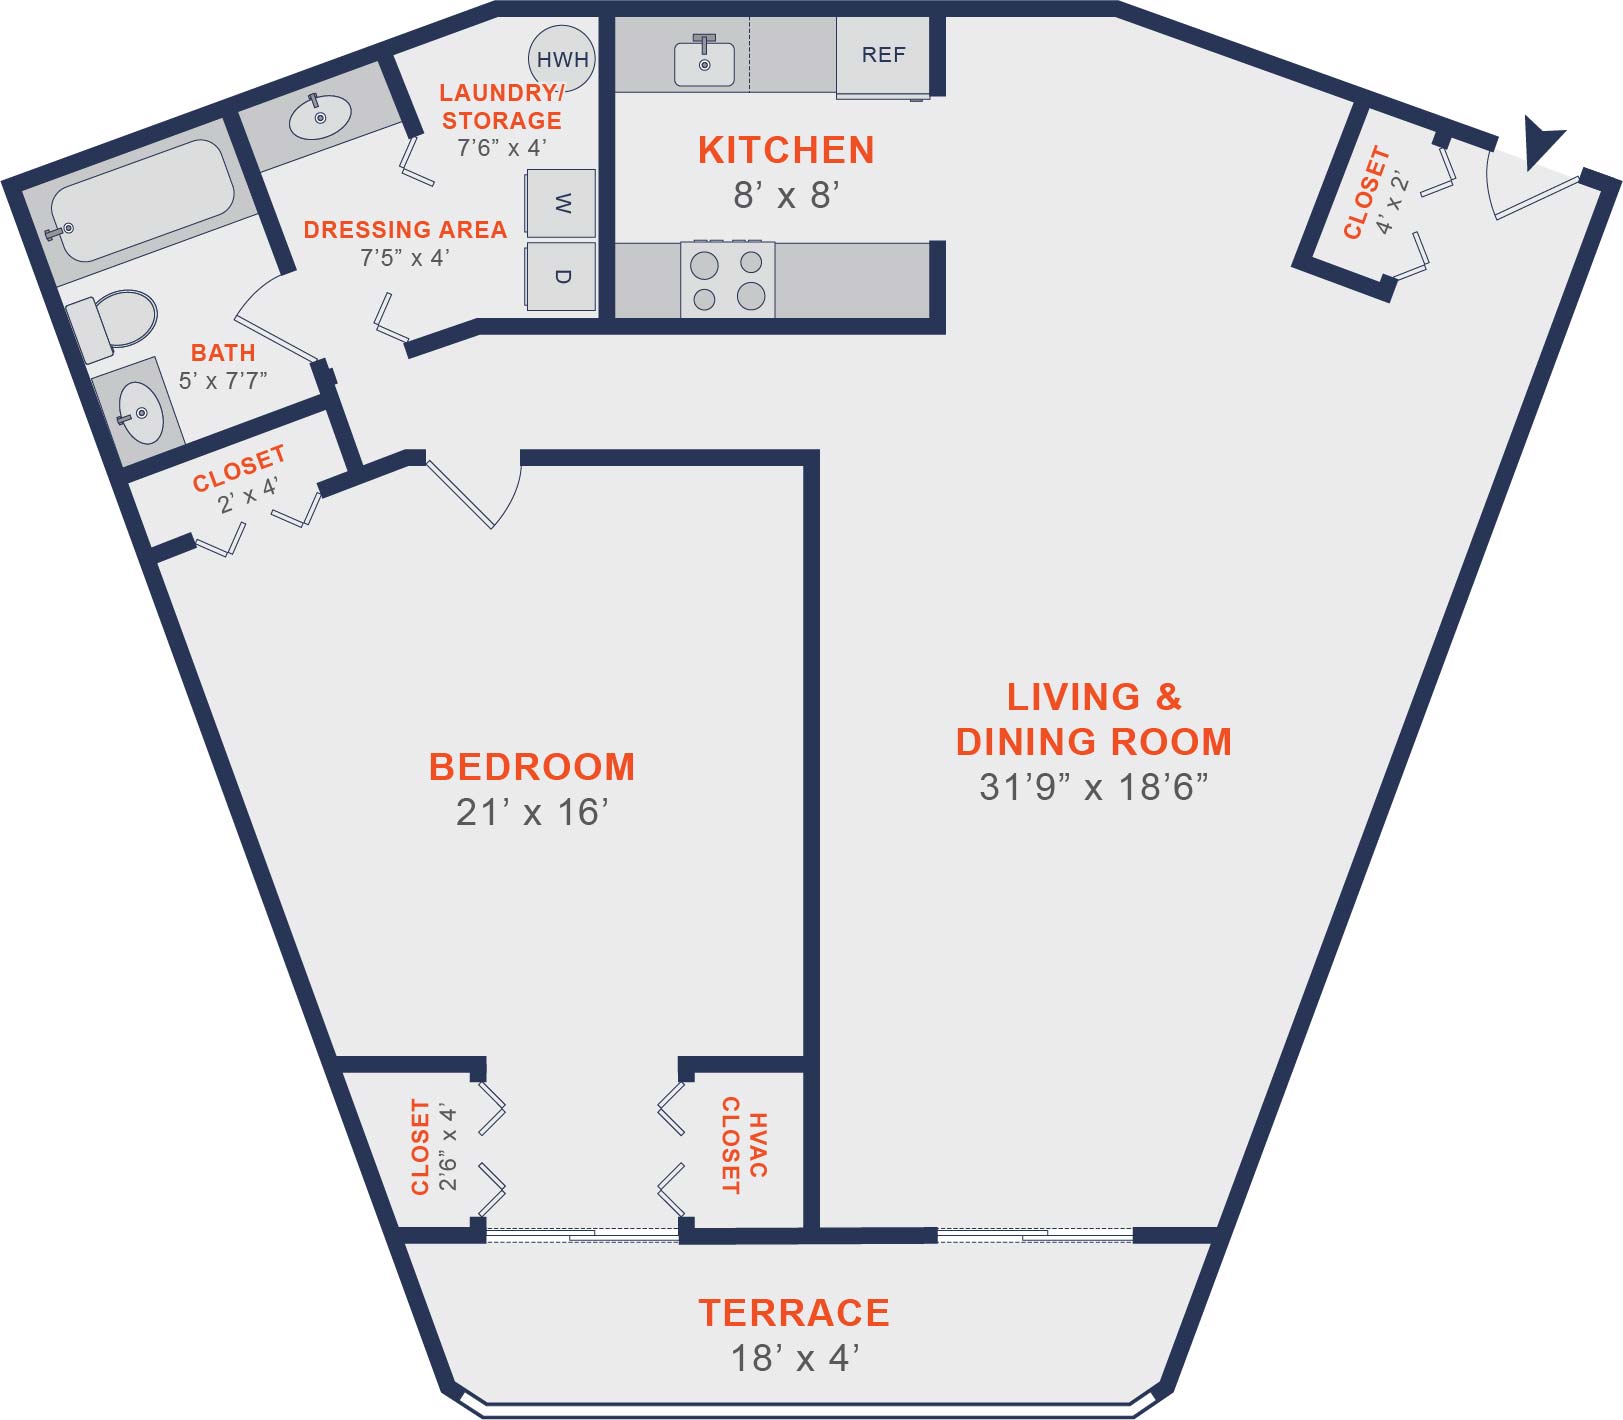 1-bedroom apartment in King of Prussia at Valley Forge Towers with 1,079 sq. ft.